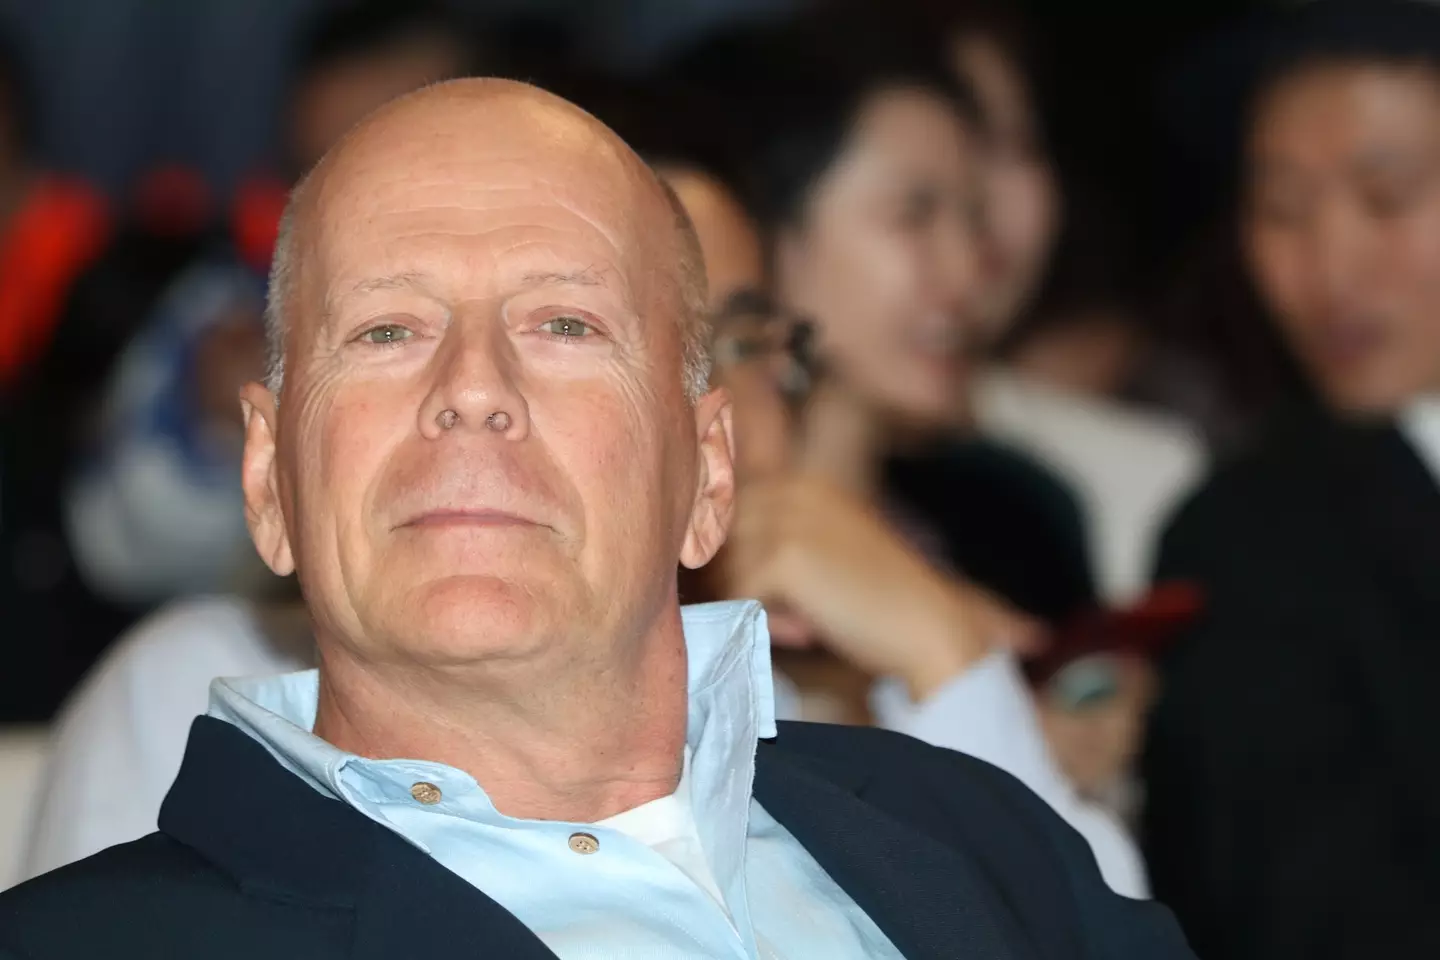 Bruce Willis was diagnosed with a rare form of dementia earlier this year.